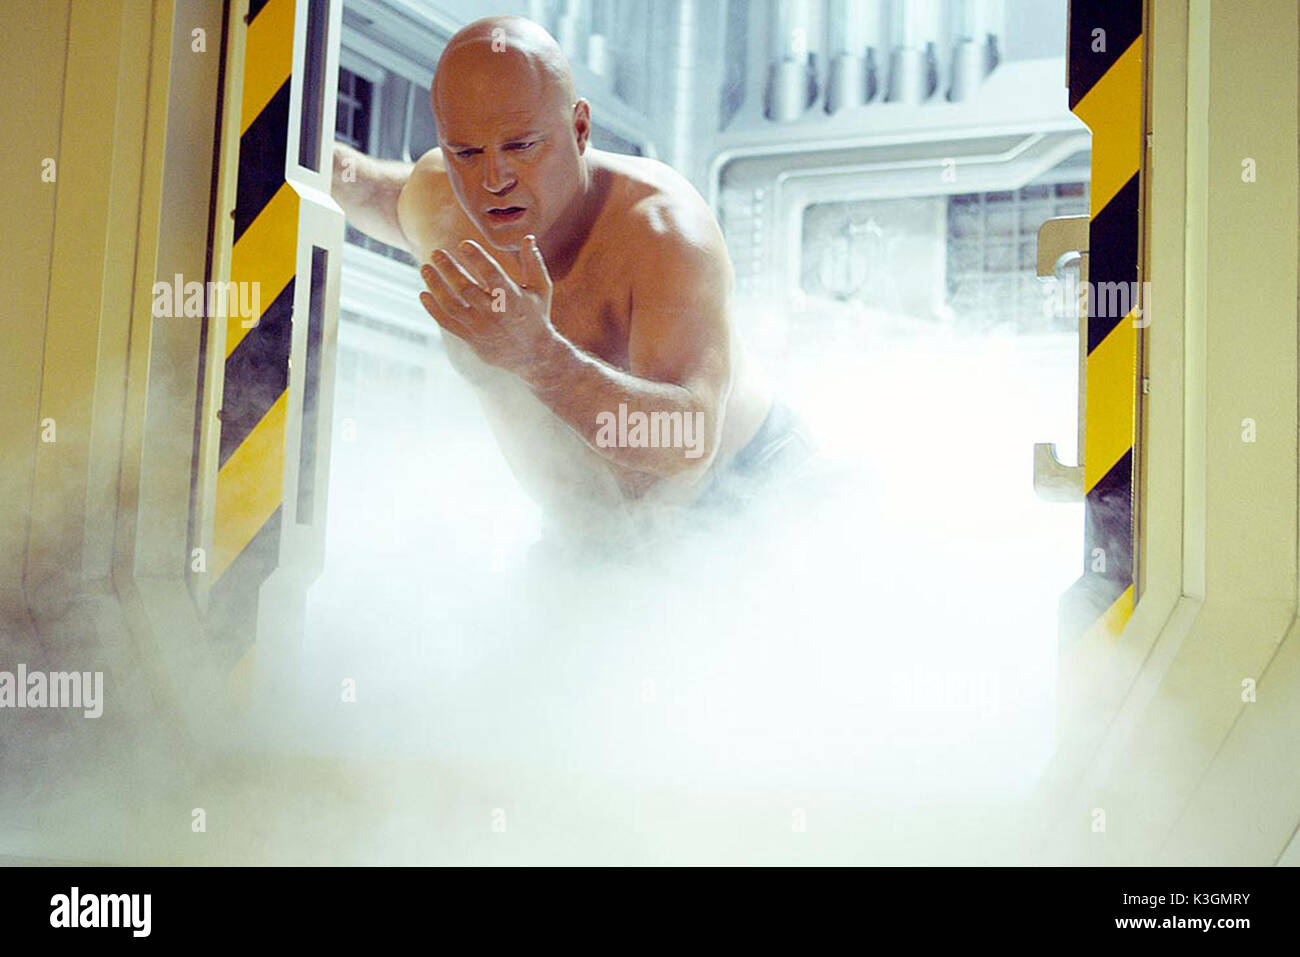 FANTASTIC FOUR MICHAEL CHIKLIS as The Thing     Date: 2005 Stock Photo